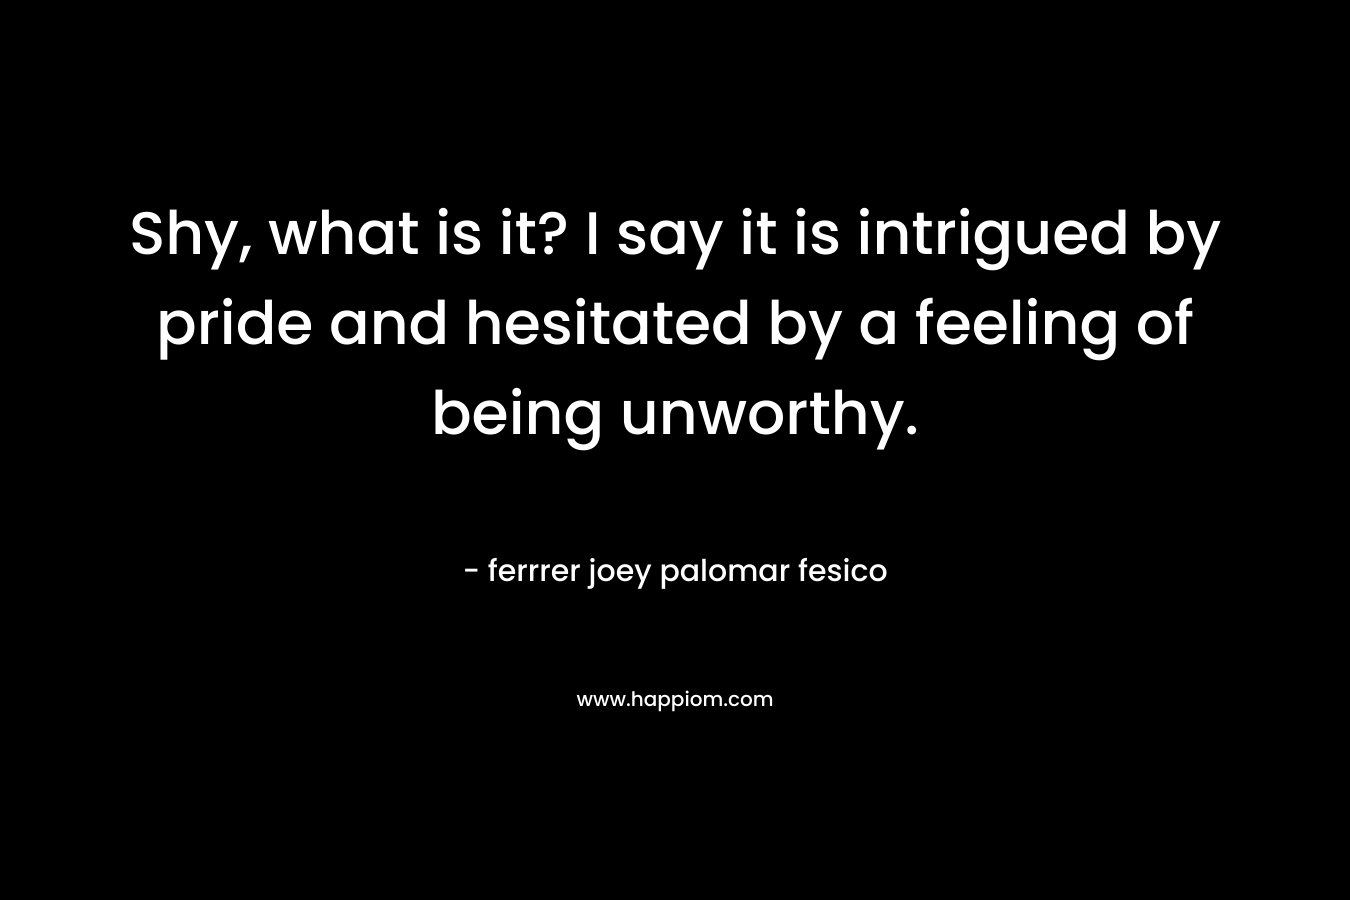 Shy, what is it? I say it is intrigued by pride and hesitated by a feeling of being unworthy. – ferrrer joey palomar fesico